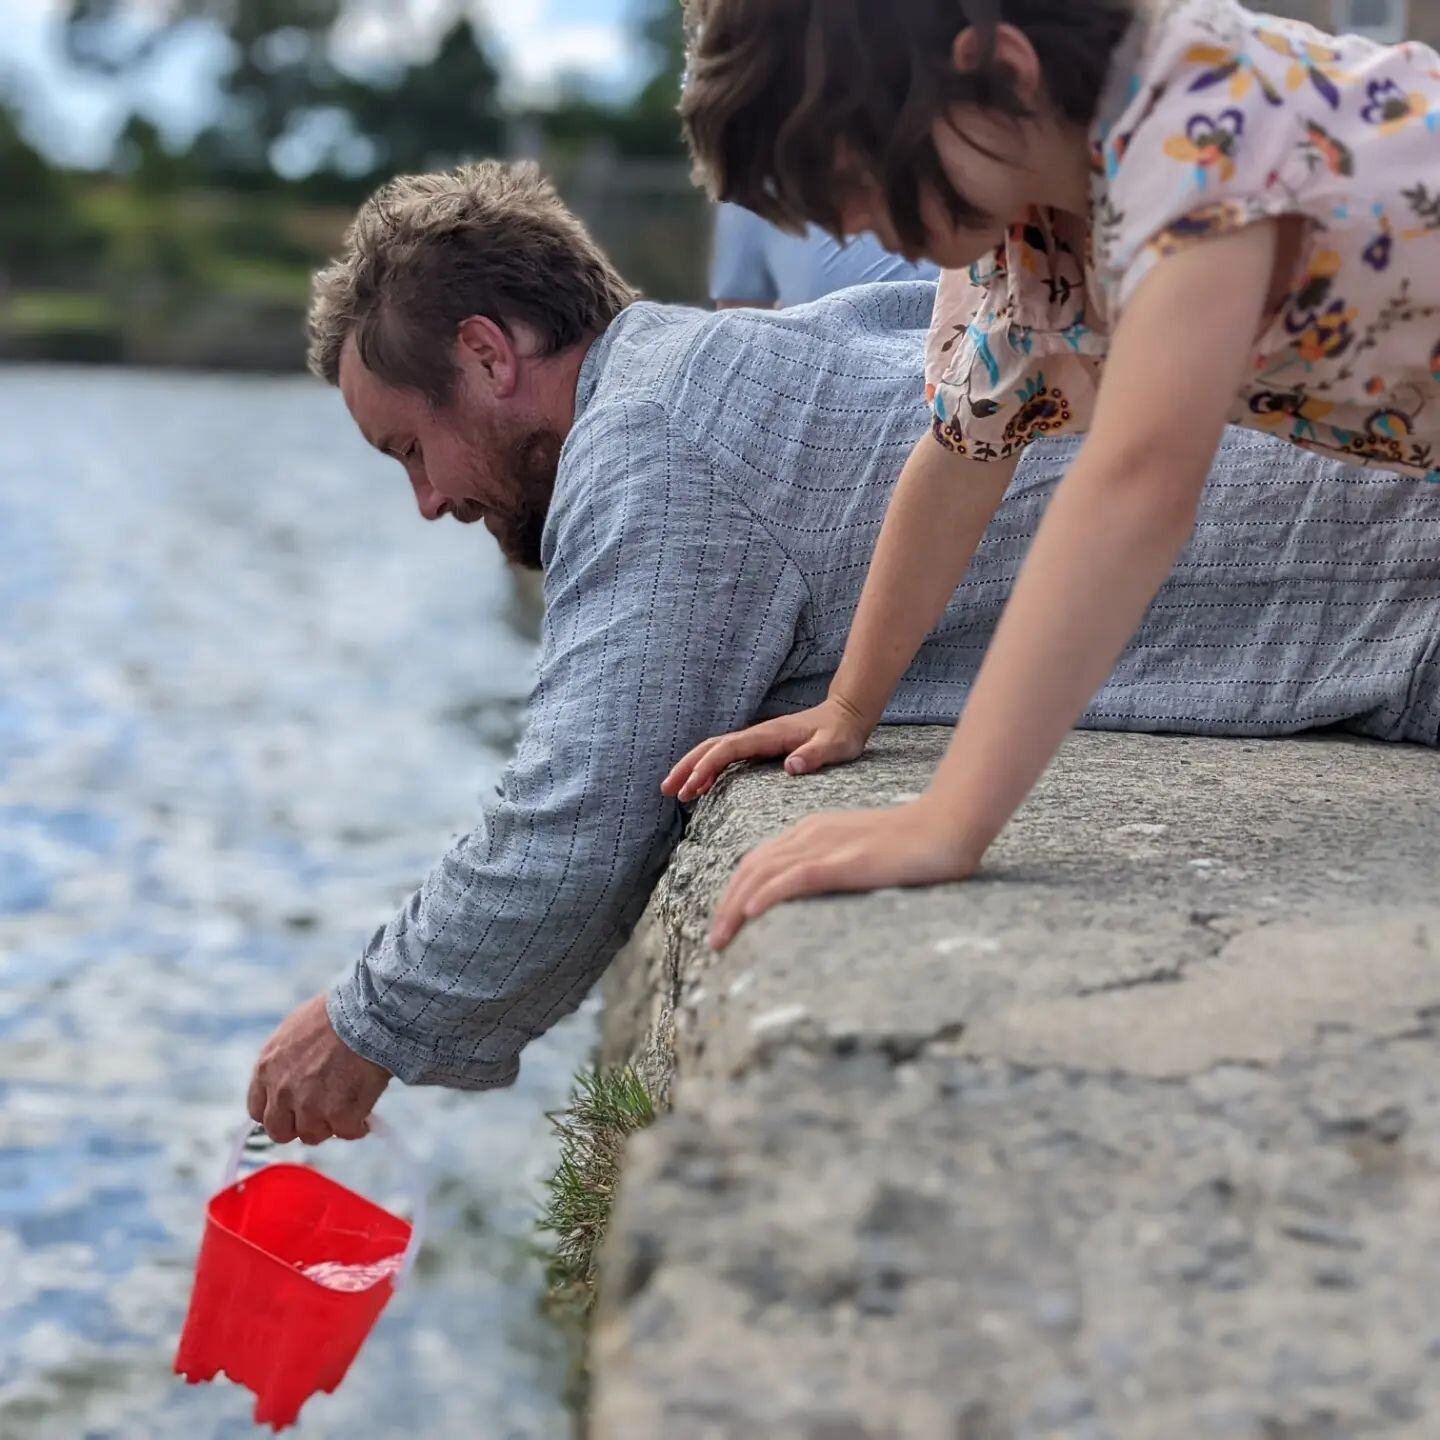 Crabbing. I don't know if this was more for the kids or for us..!

It's been a pretty mental year so far, so it was very nice to disappear into Pembrokeshire for a bit. Some sun, swimming, sandcastles, walking, biking and exploring - all the good sum